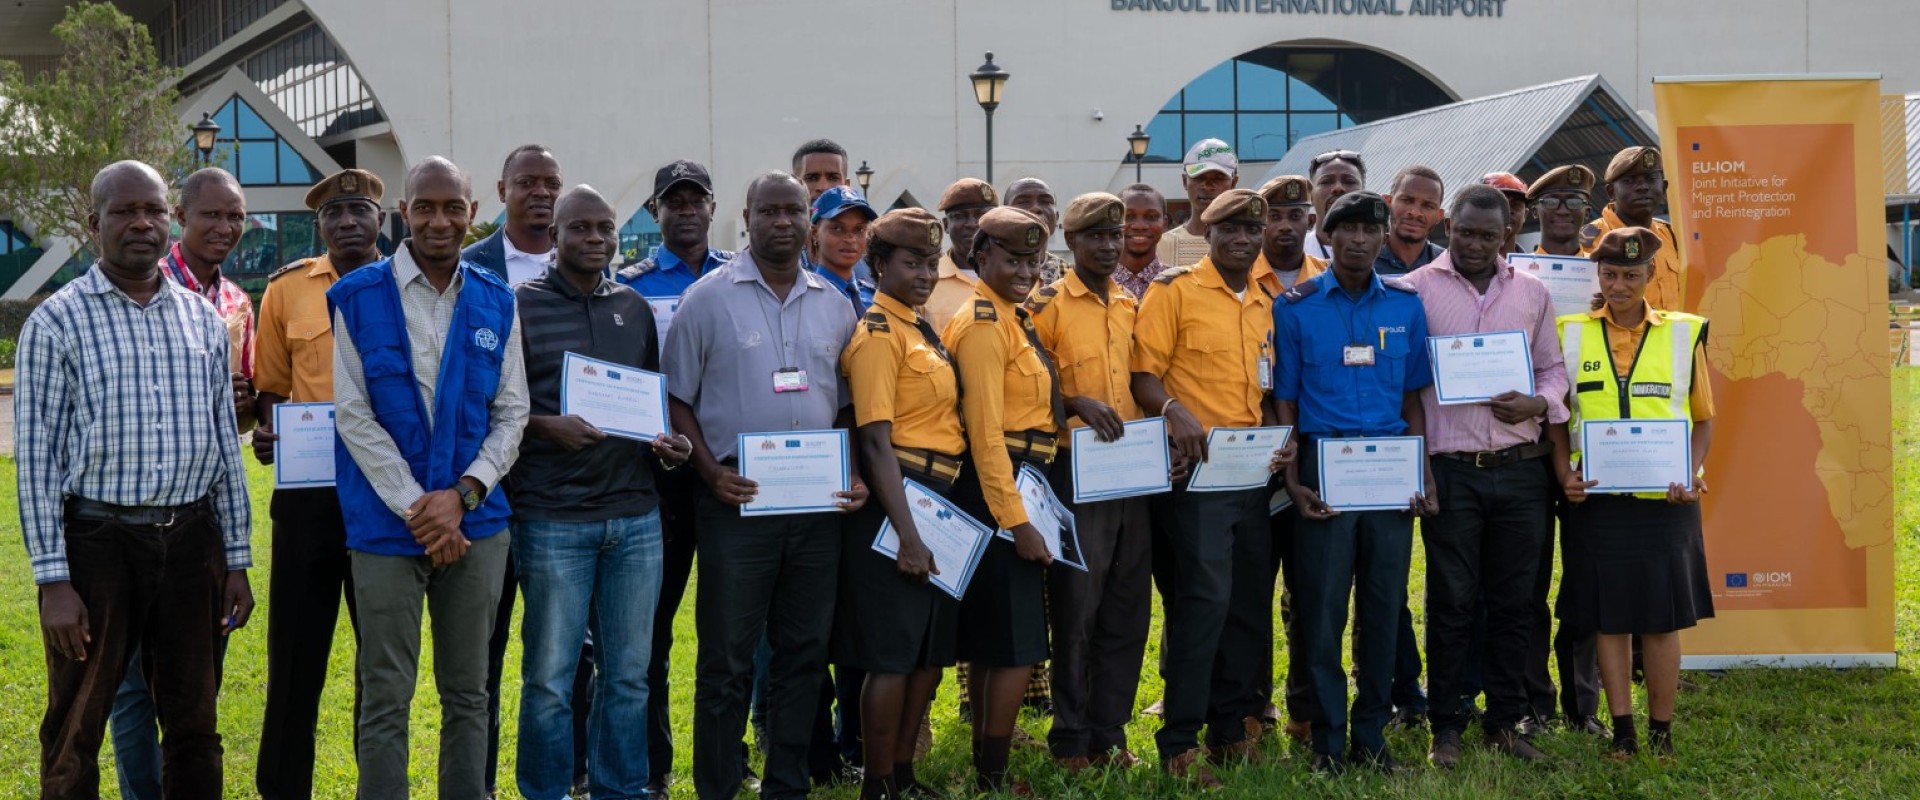 IOM facilitated the training of 100 law enforcement and immigration officers at Banjul International Airport on humane and rights-based approaches to ensure reception and post-arrival assistance for returnees remains safe and dignified. ©IOM 2022/Robert Kovacs